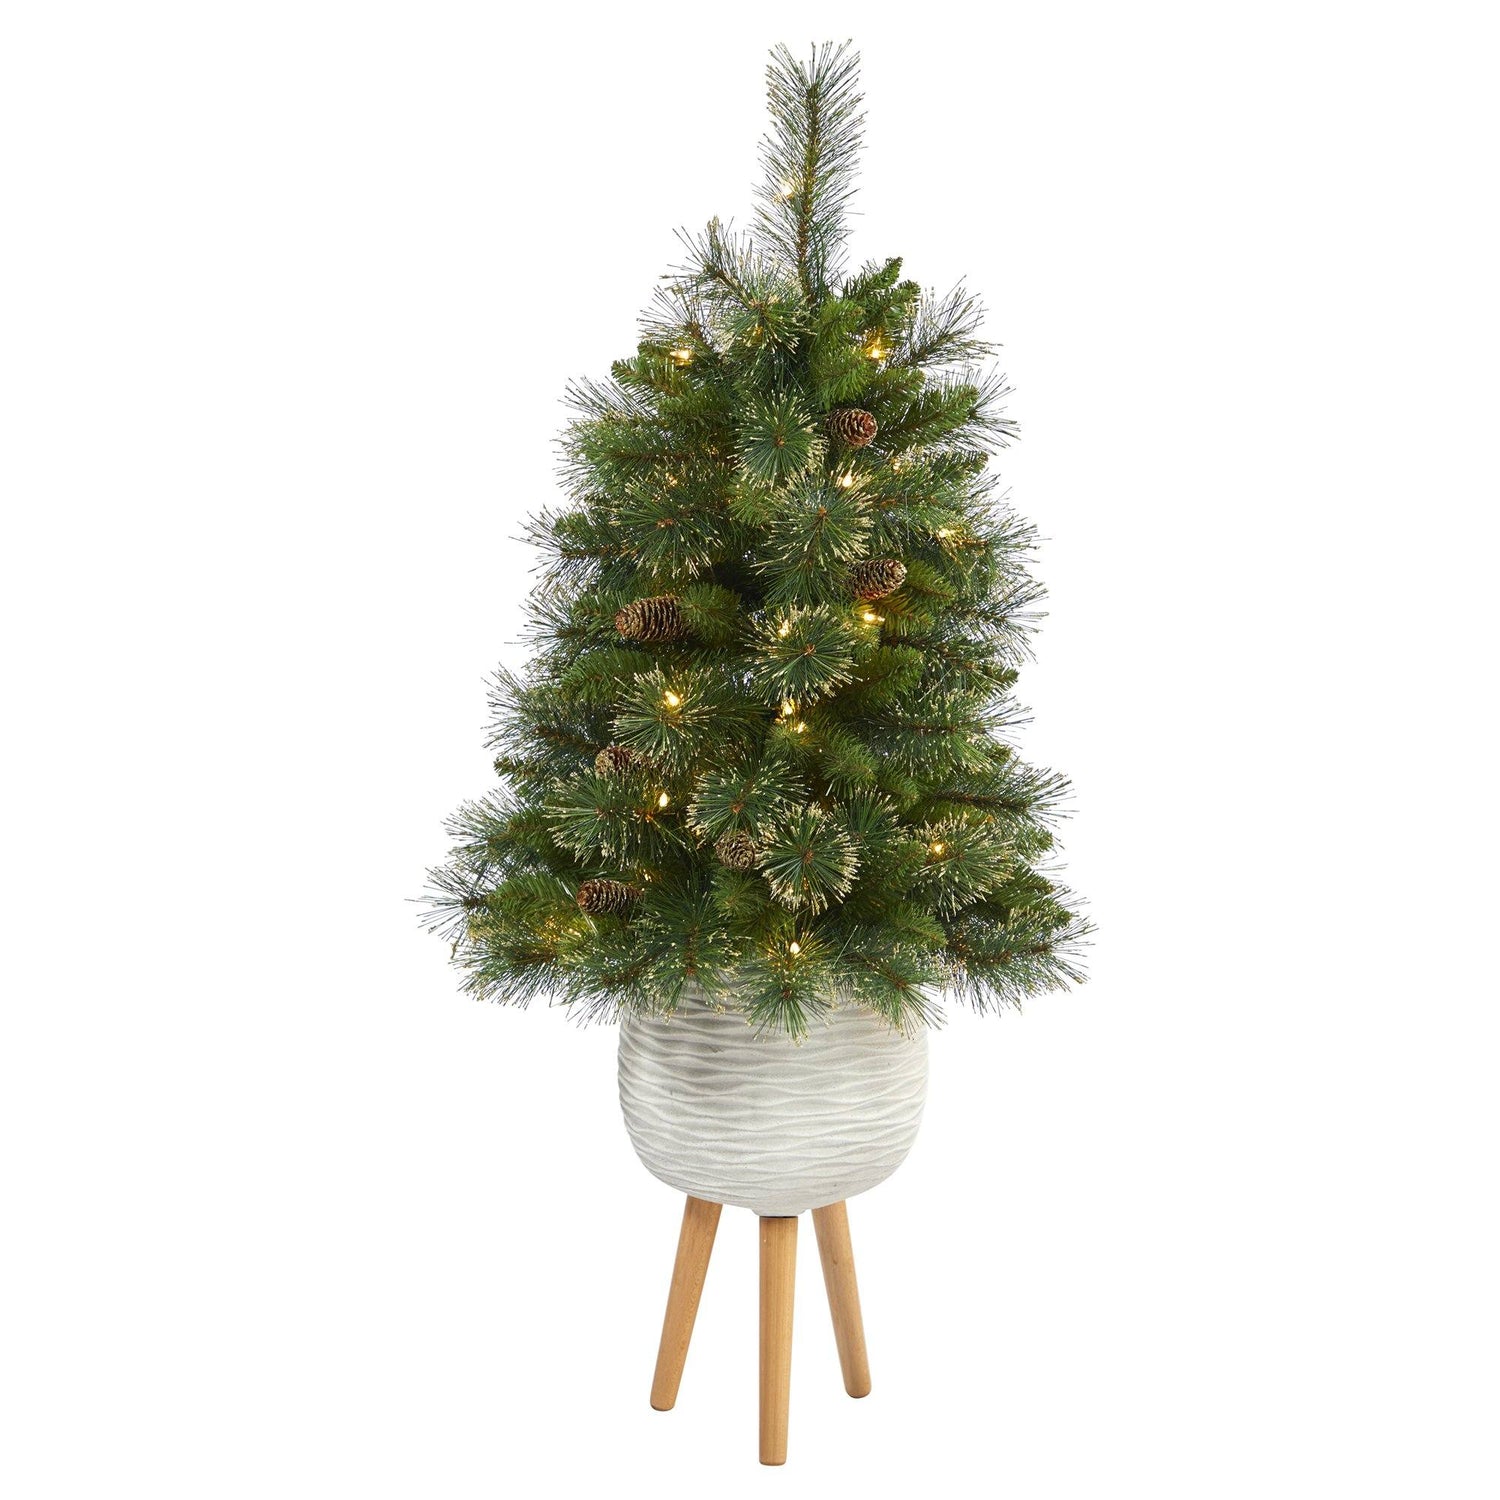 4’ Golden Tip Washington Pine Artificial Christmas Tree with 50 Clear Lights, Pine Cones and 148 Bendable Branches in White Planter with Stand